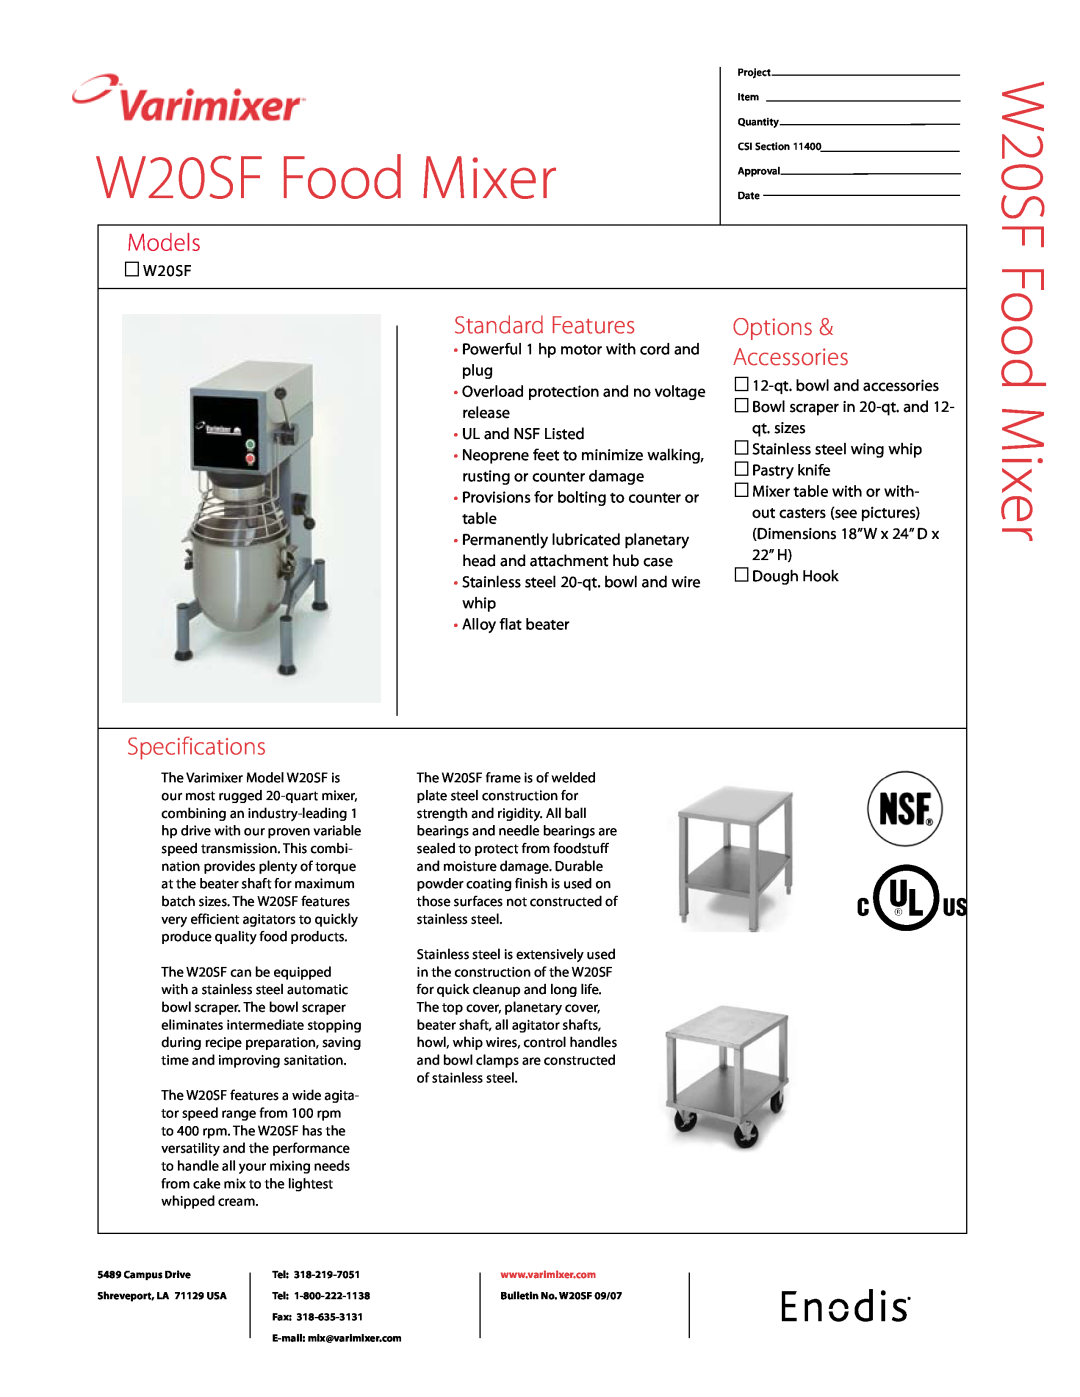 Varimixer specifications W20SF Food Mixer, Models, Standard Features, Options, Accessories, Specifications 